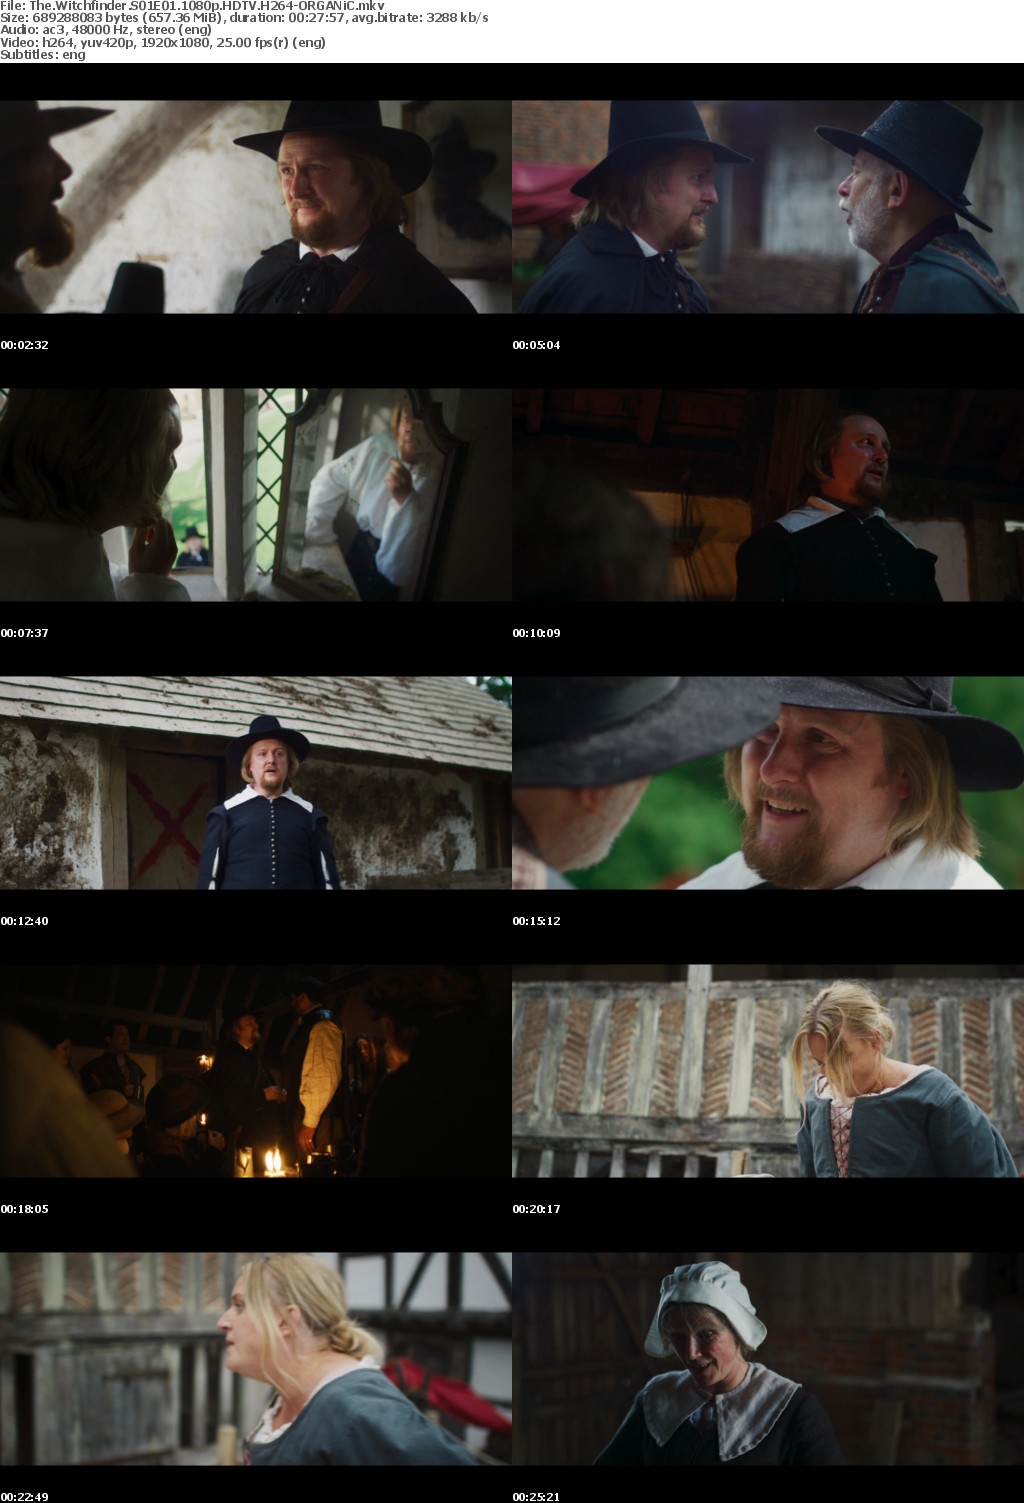 The Witchfinder S01E01 1080p HDTV H264-ORGANiC